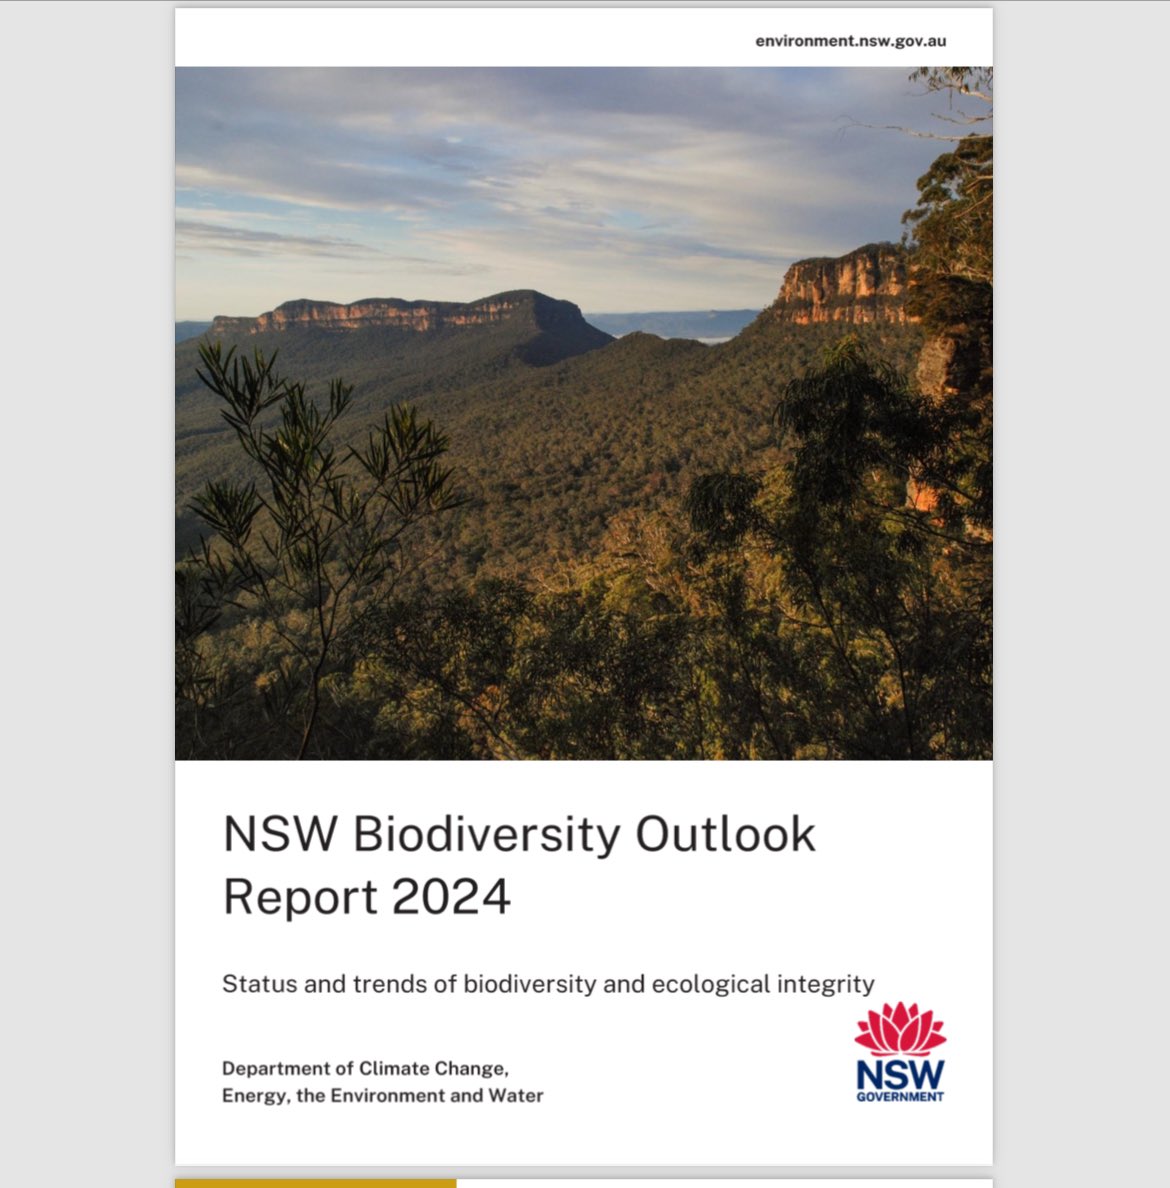 NSW Biodiversity Outlook Report today shows it’s really bad, even worse than the last report in 2020. Habitat Destruction, Land Clearing & Logging the main cause. The Coalition accelerated destruction but NSW Labor has been in power for over 12 months and done NOTHING! #nswpol